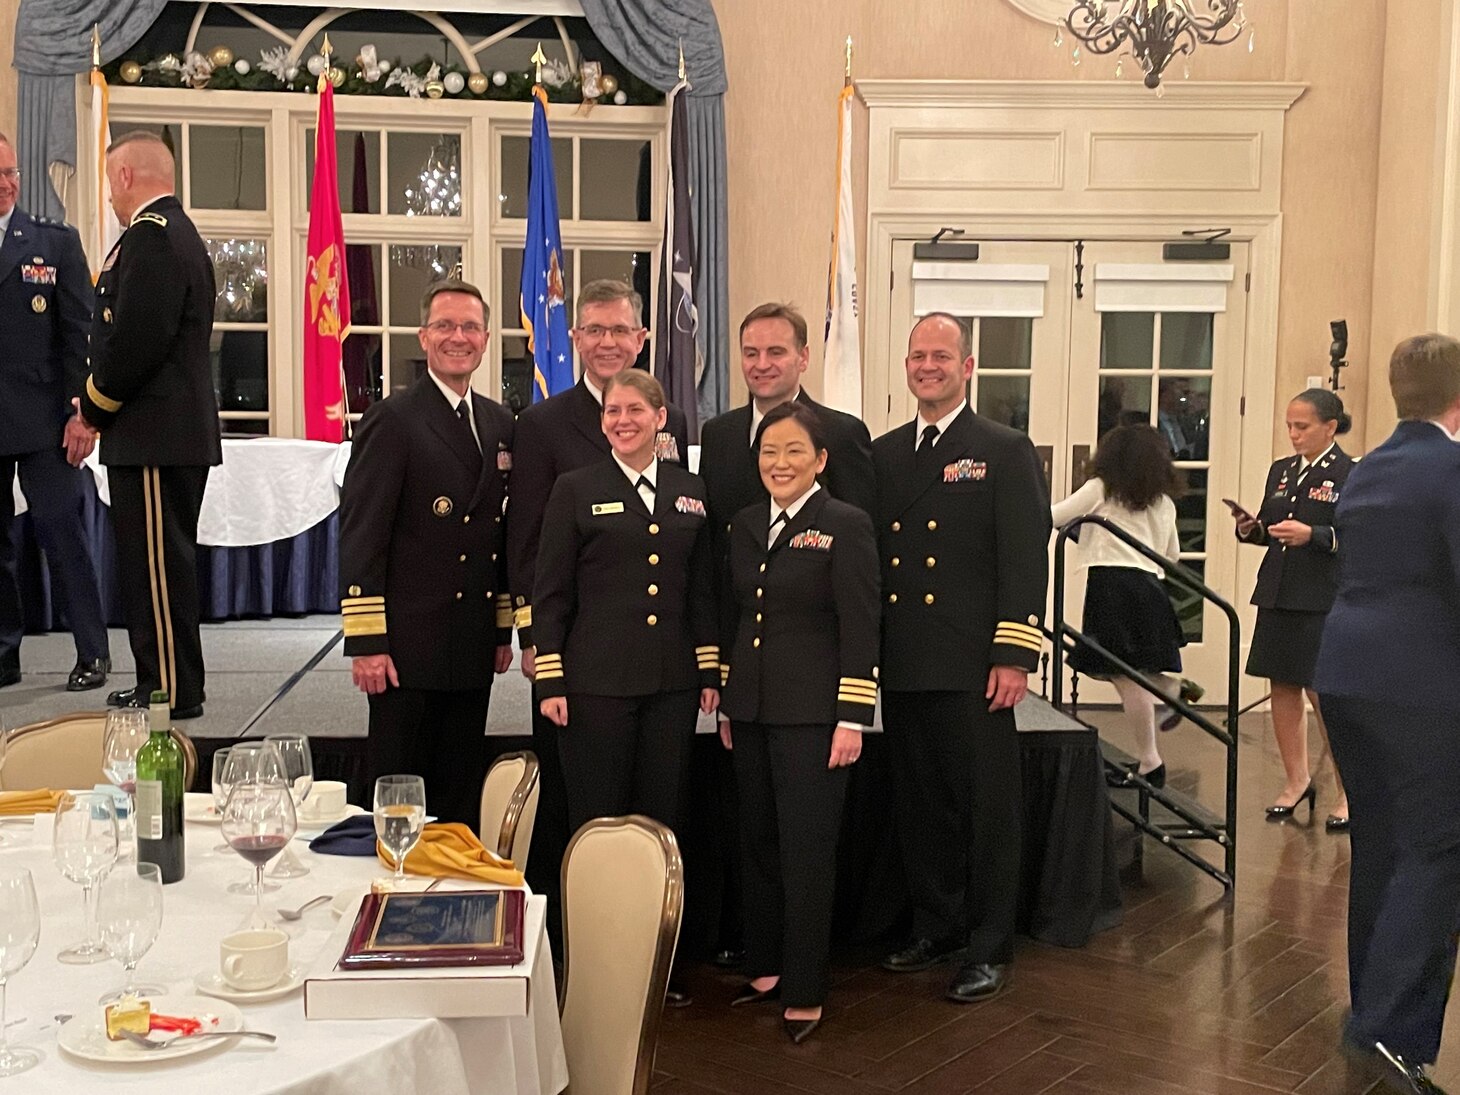 In December 2021, the Navy JAG community recipients of the 2020 and 2021 Judge Advocate Awards celebrated with the Navy JAG and the Deputy JAG for Reserve Affairs and Operations.